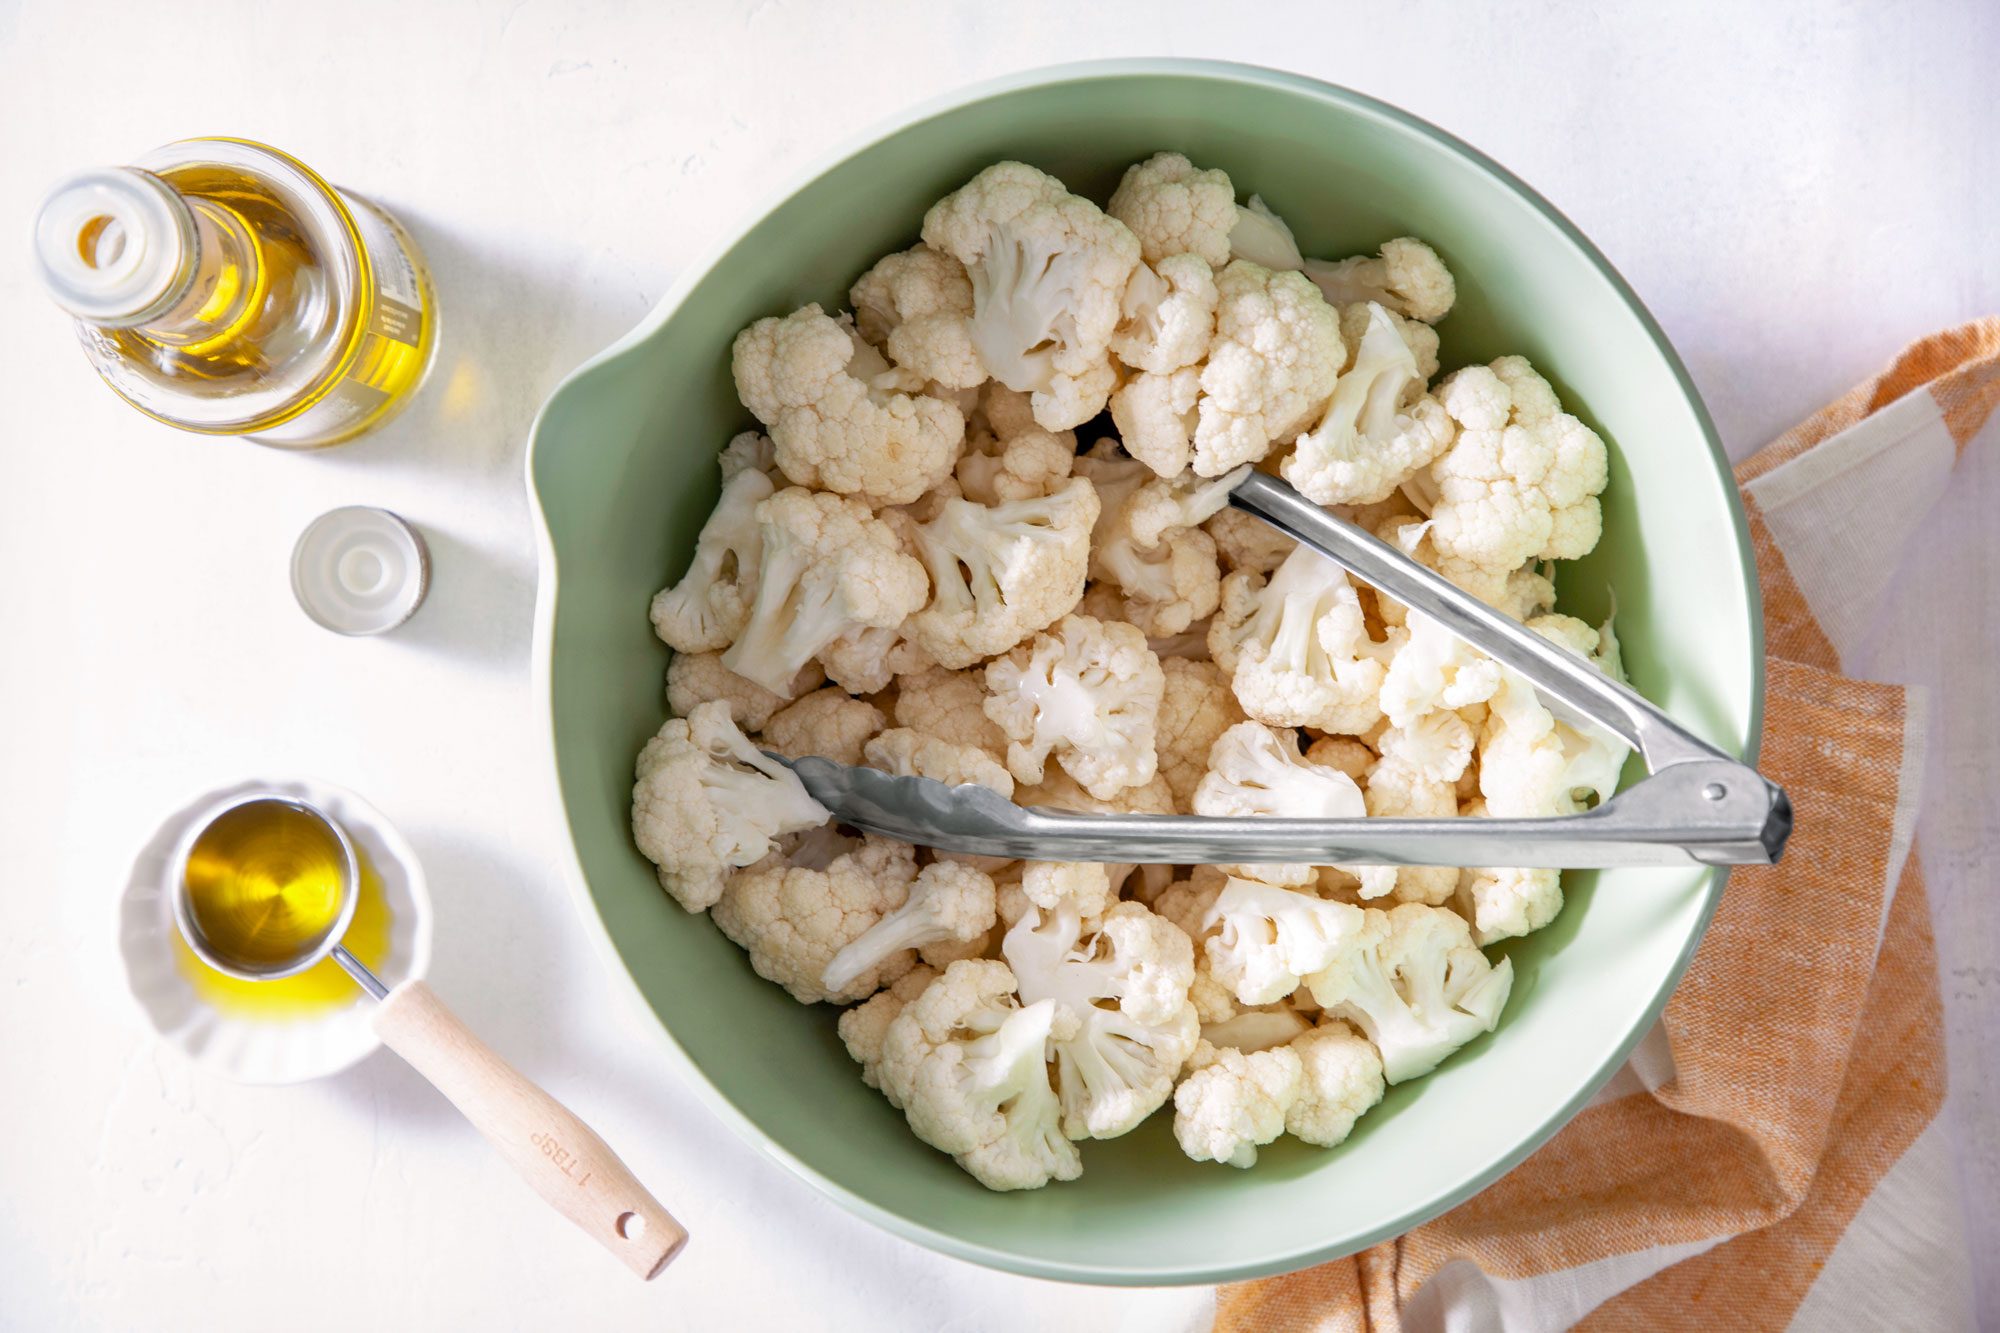 Cauliflower in a Big Bowl with Oil in a Bottle and A Spoon